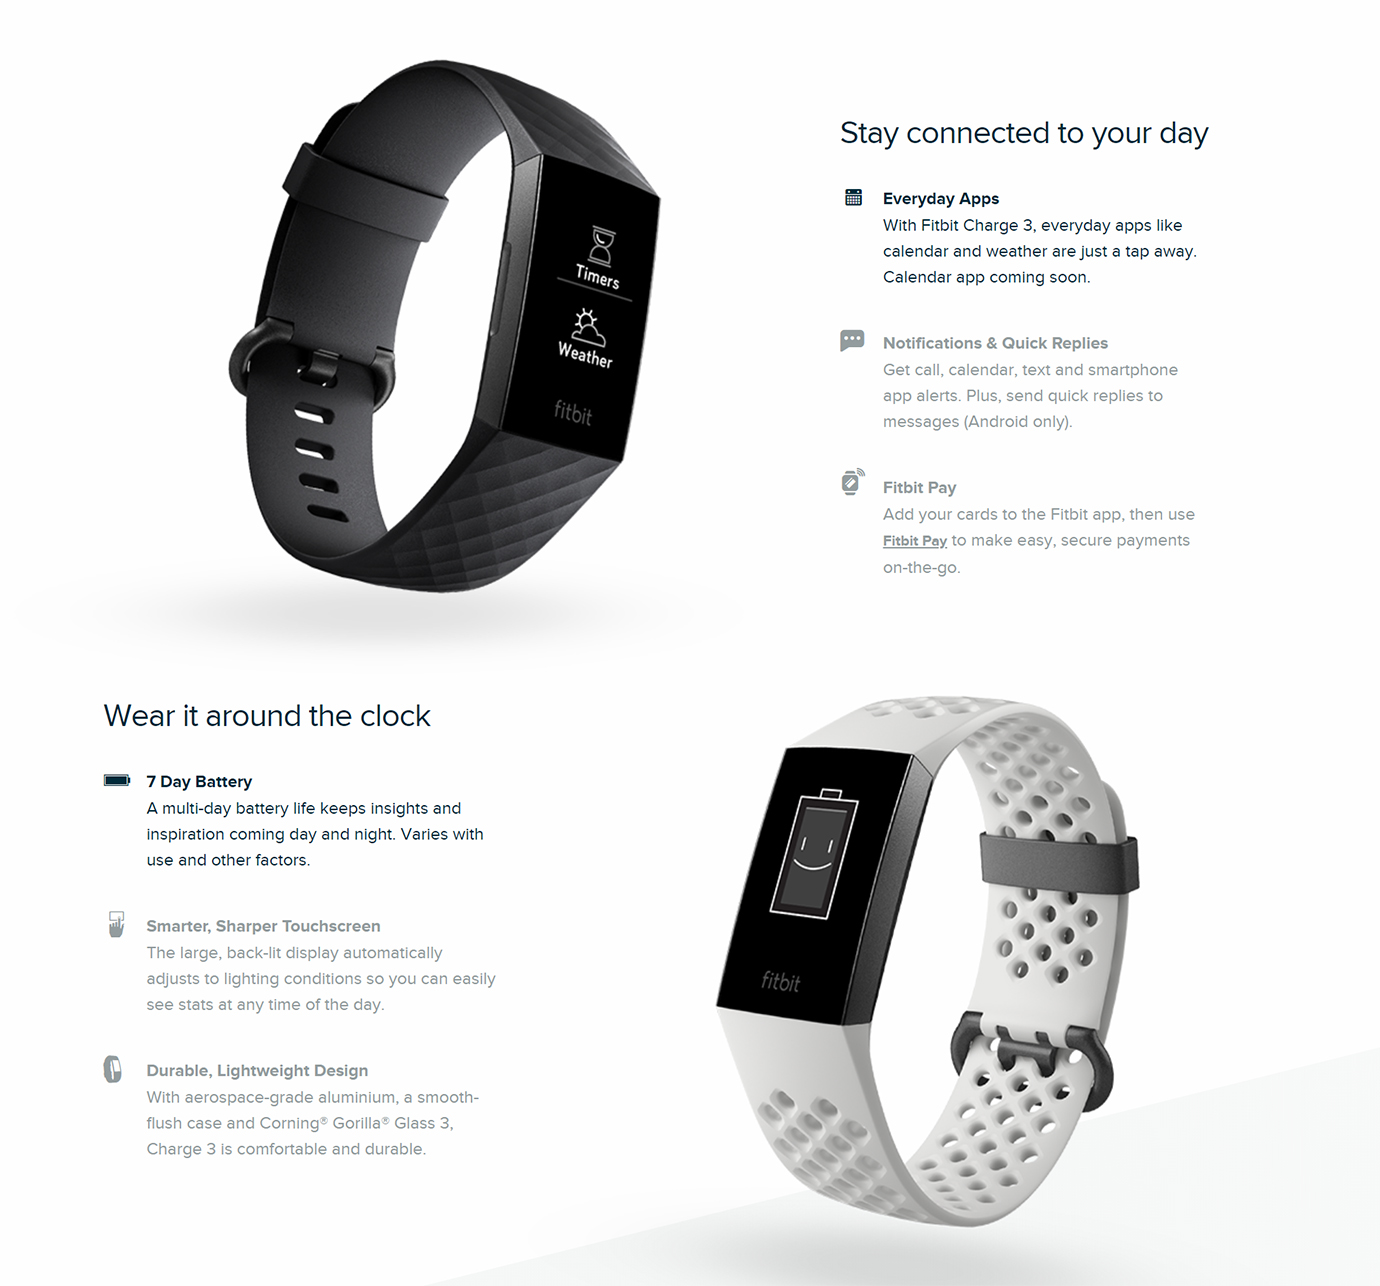 is fitbit charge 3 compatible with iphone